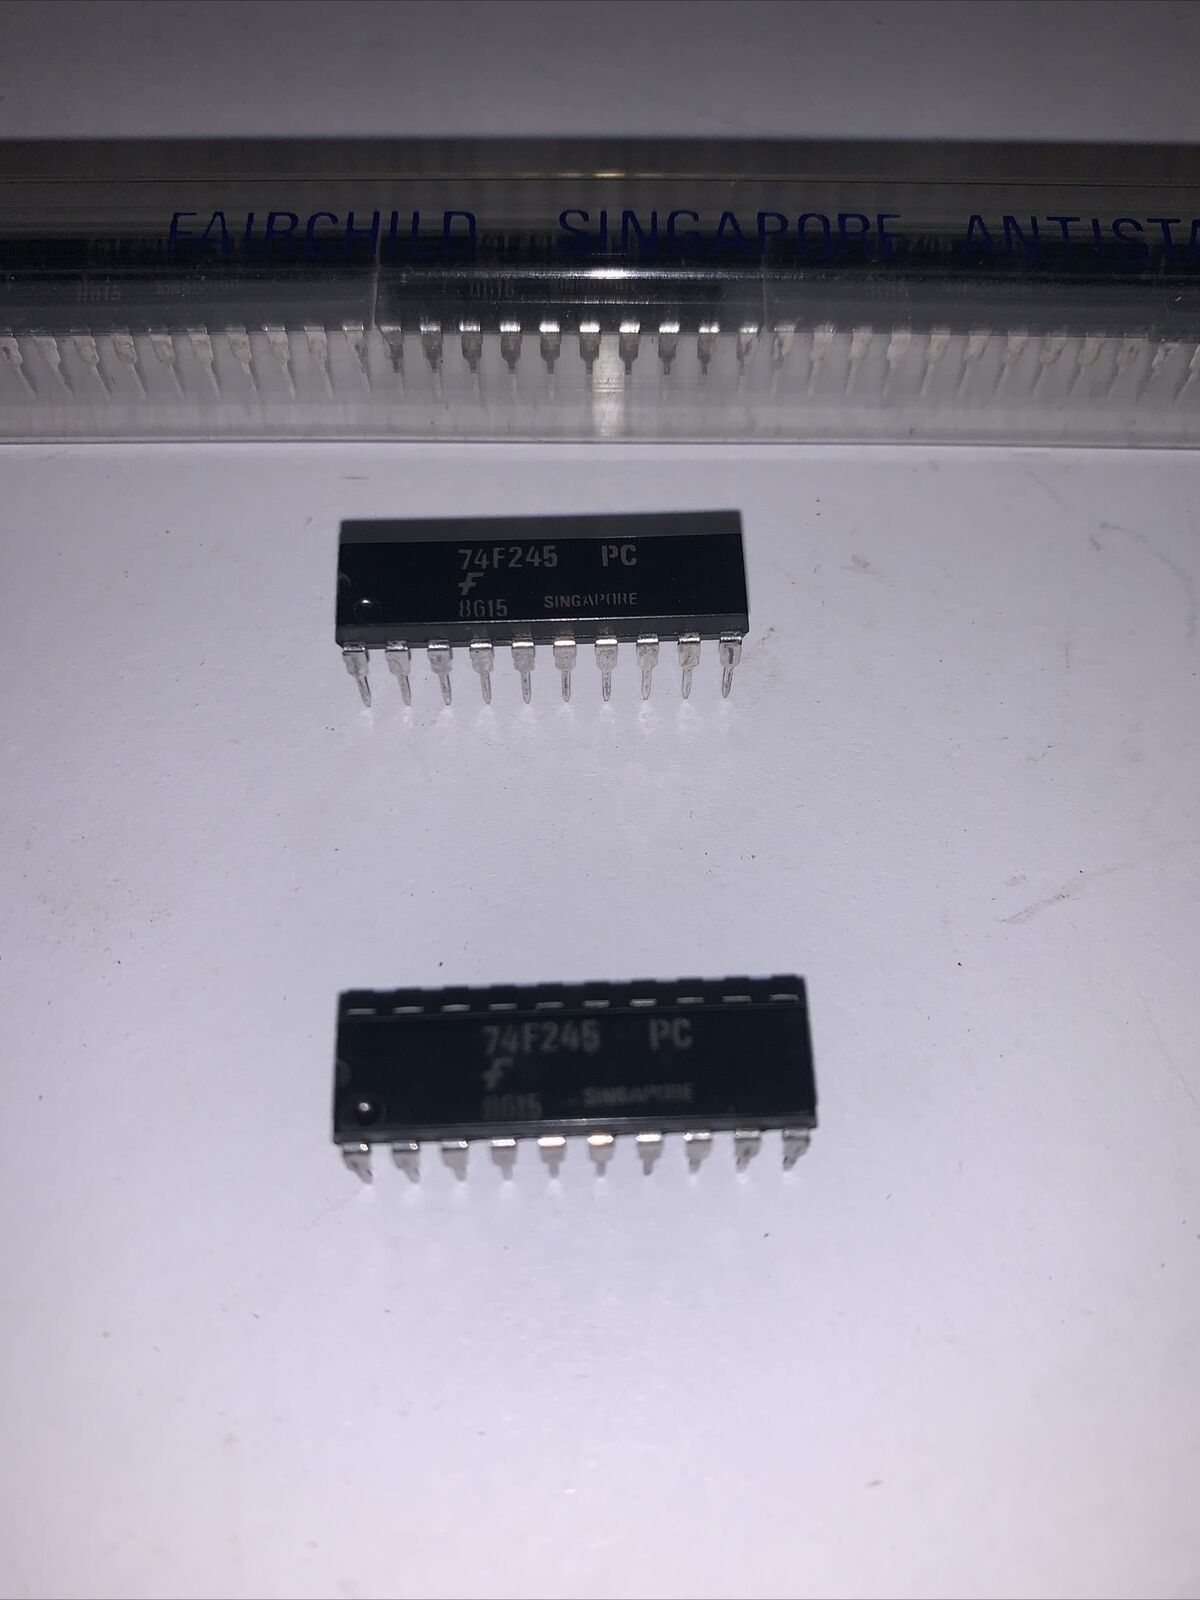 74F245 Logic IC Chip DIL / DIP 74F245PC FAIRCHILD SEMICONDUCTOR New Lot Of (2)